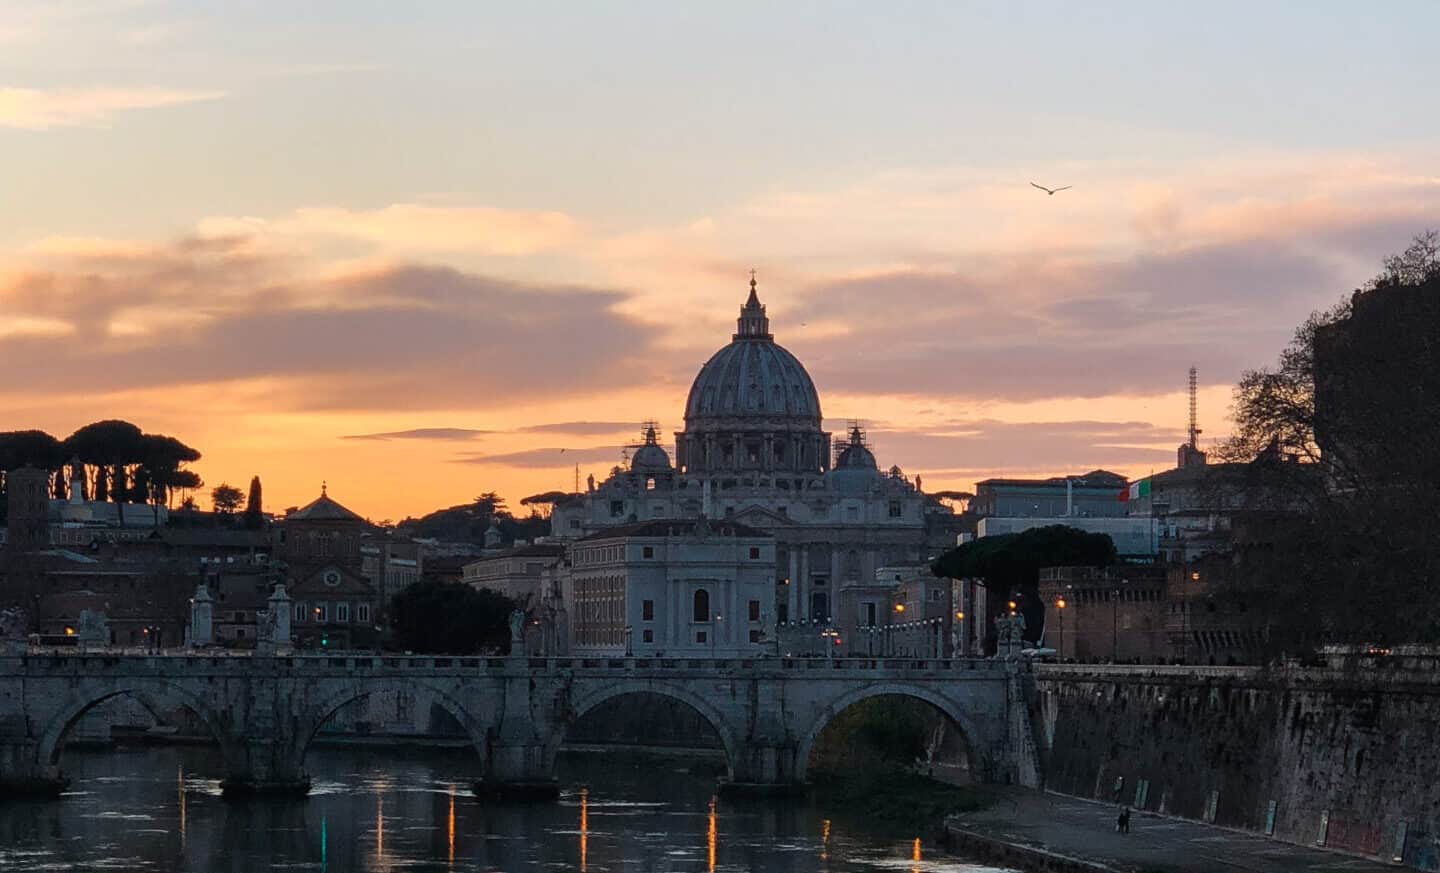 Sunset behind St. Peter's Basilica in Rome during autumn